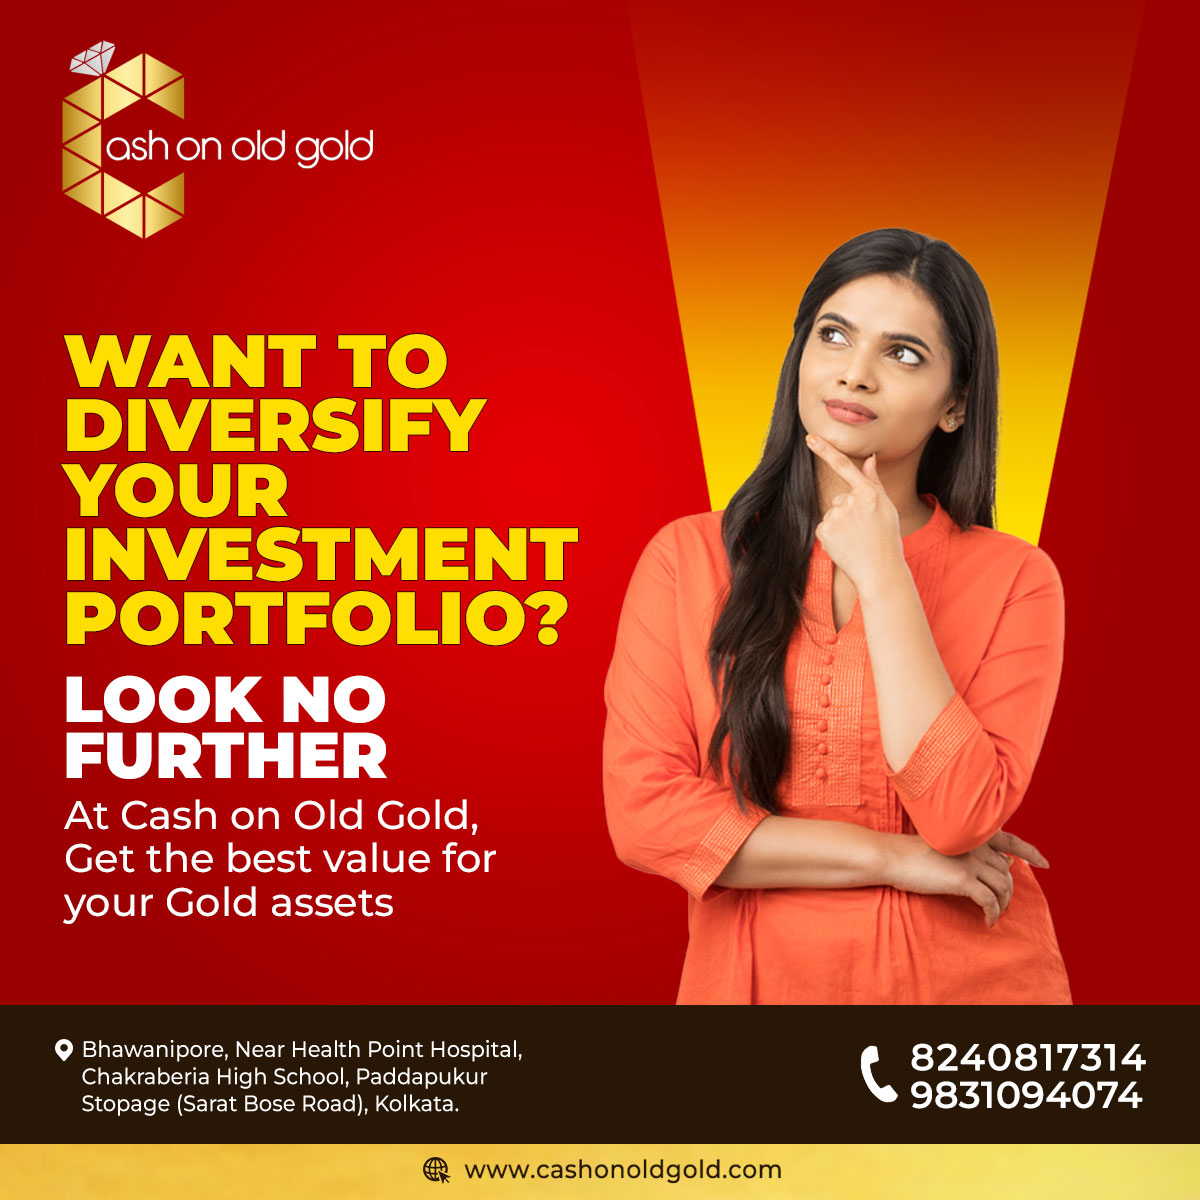 Ready to diversify your investment portfolio? Get the best value for your Gold assets at Cash On Old Gold.

#CashOnOldGold #OldJewelleryBuyer #jewellerydesign #SellGold #GoldFacts #Goldenoppetunity #InstantCash